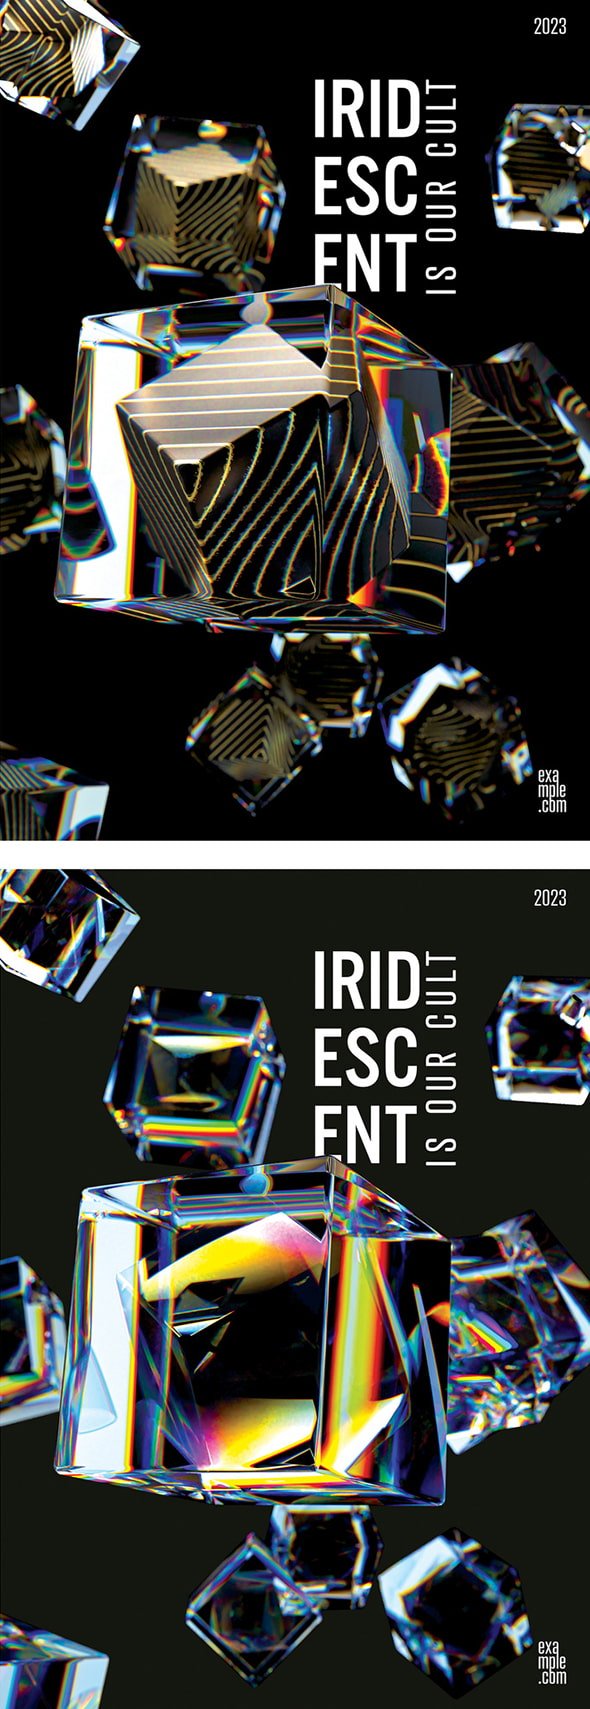 AdobeStock - Trendy Design Posters Layout with Composition of 3D Translucent Iridescent Cubes - 407520472